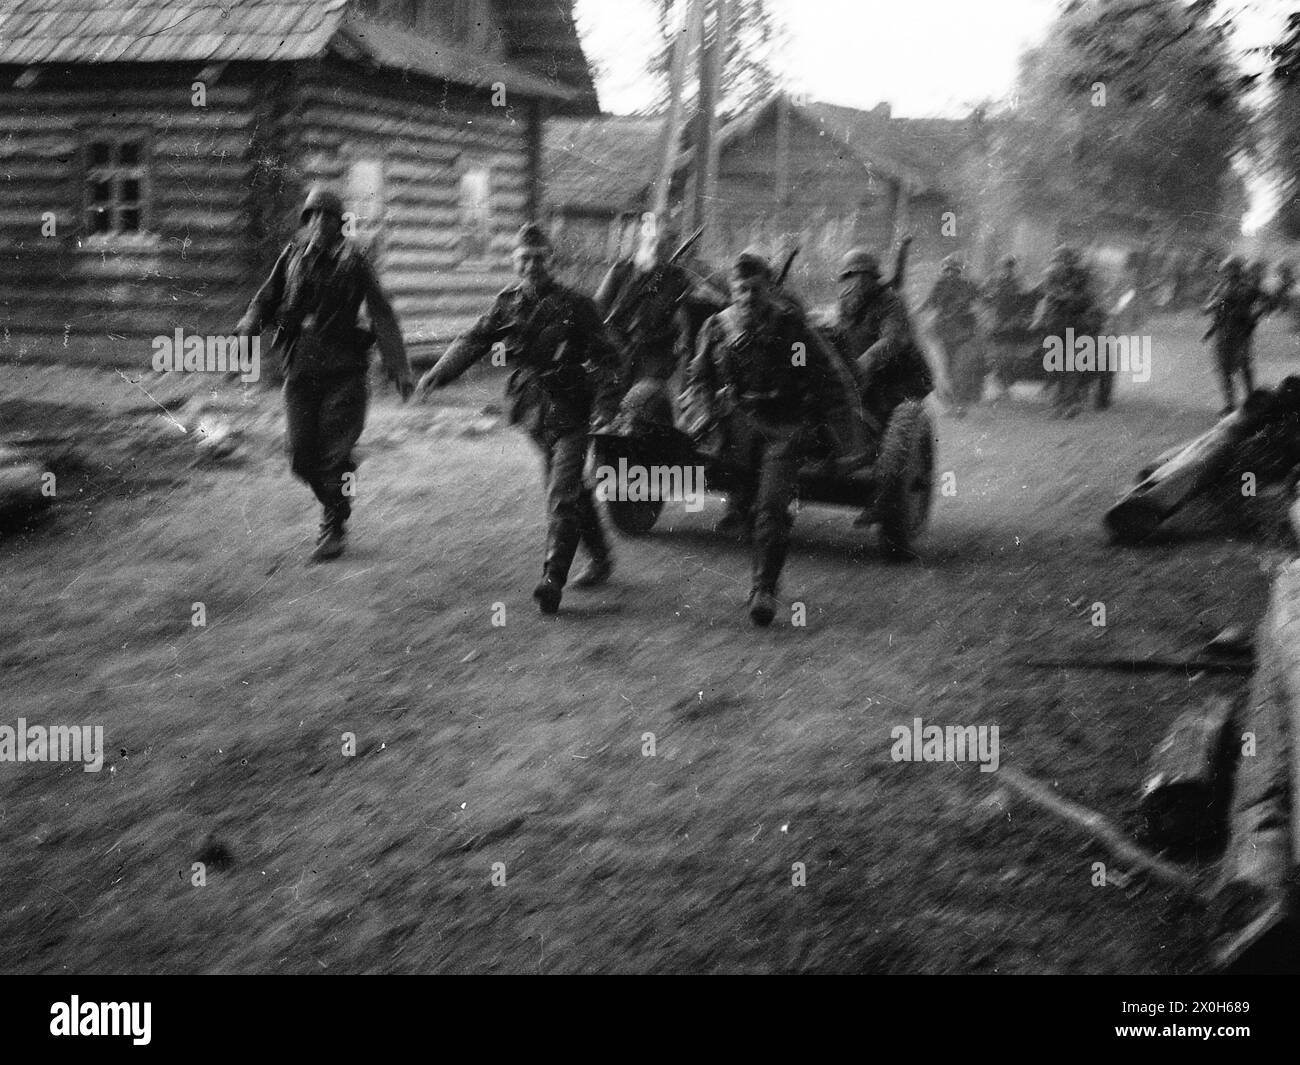 In a village in the hinterland of the Eastern Front, German soldiers drag infantry guns along the dusty road. The picture was probably taken in connection with battles with partisans. The picture was taken by a member of the Radfahrgrenadierregiment 2, presumably in the middle section of the Eastern Front. [automated translation] Stock Photo